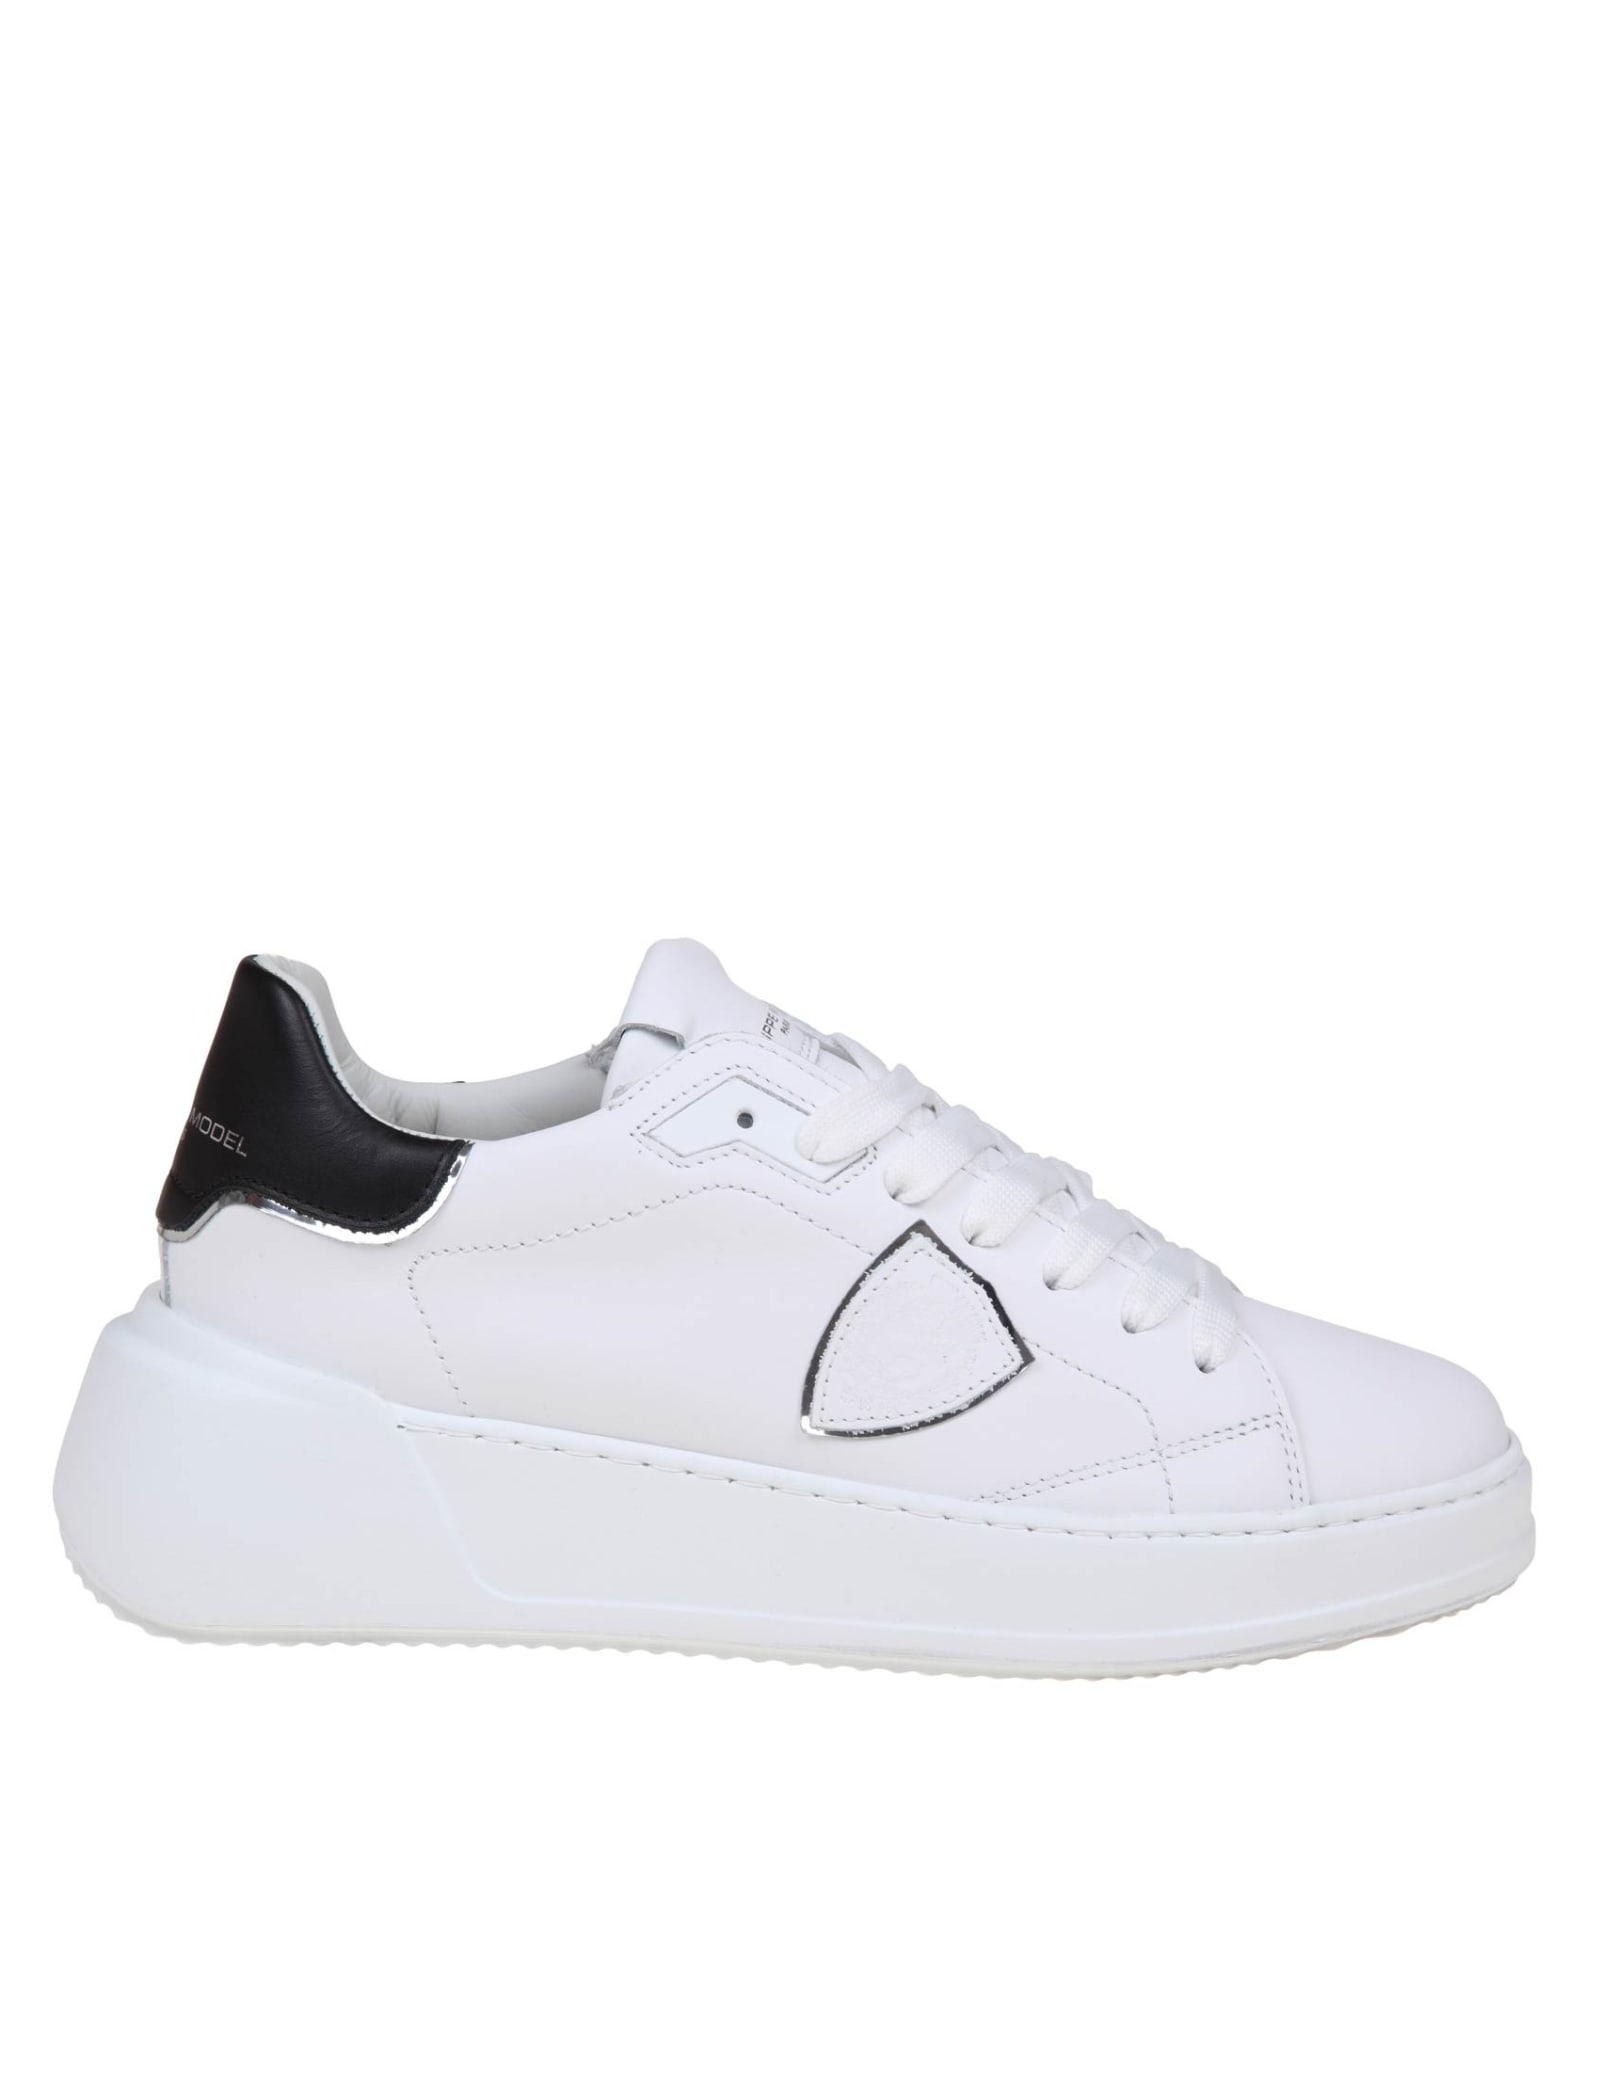 Philippe Model Tres Temple Low In Black And White Leather In White/black